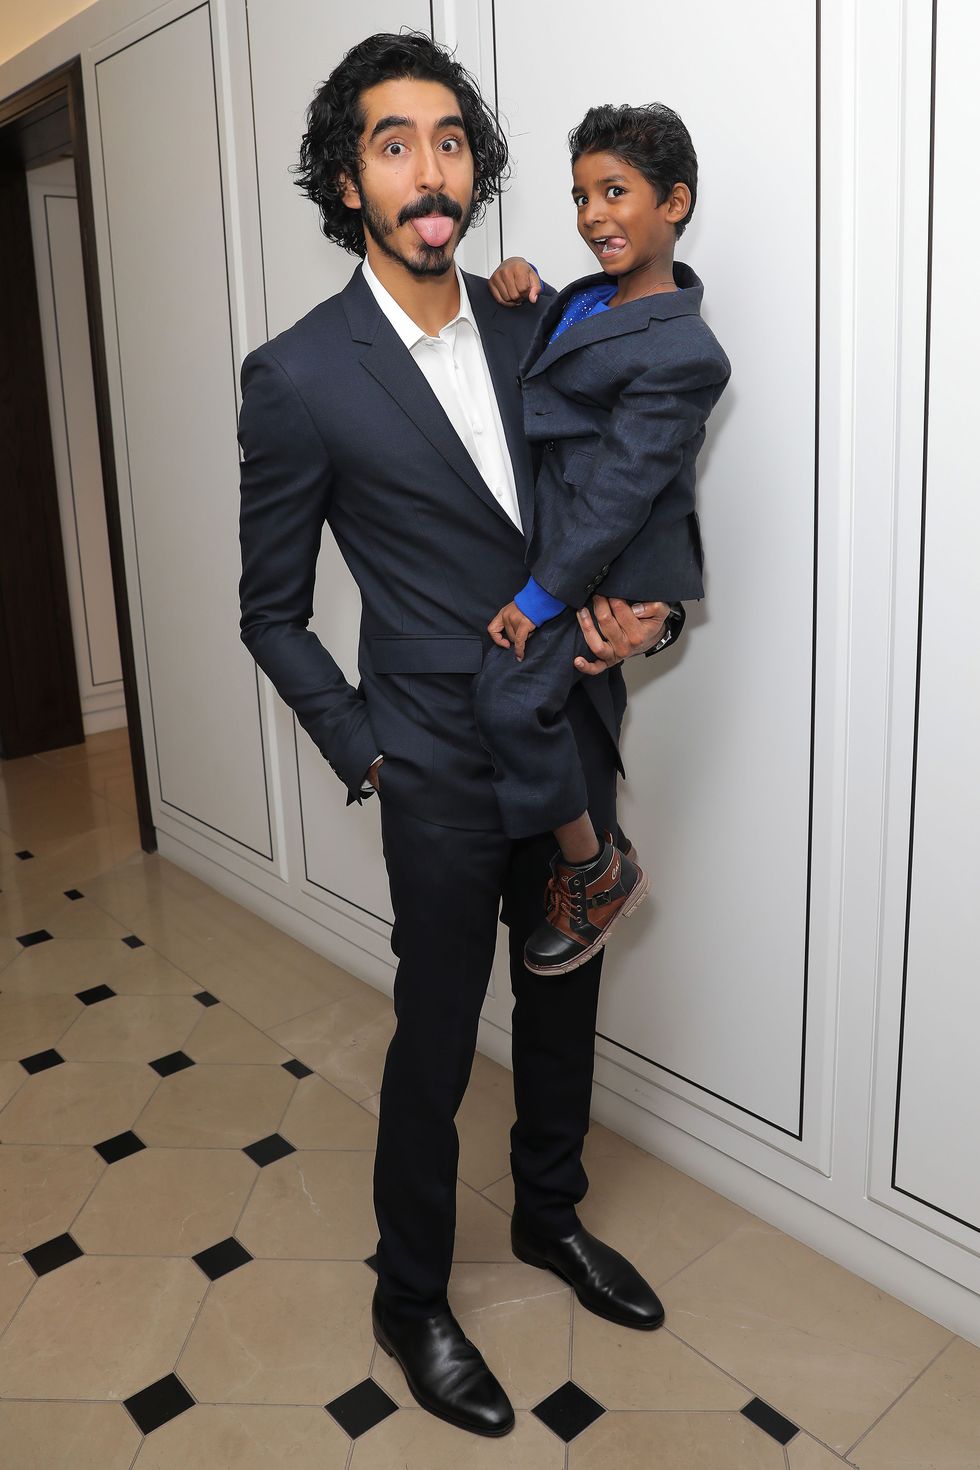 <p>At a Burberry and The Weinstein Company celebration in honor of Dev Patel's&nbsp;performance in&nbsp;<em data-redactor-tag="em">Lion</em><span class="redactor-invisible-space"></span></p>